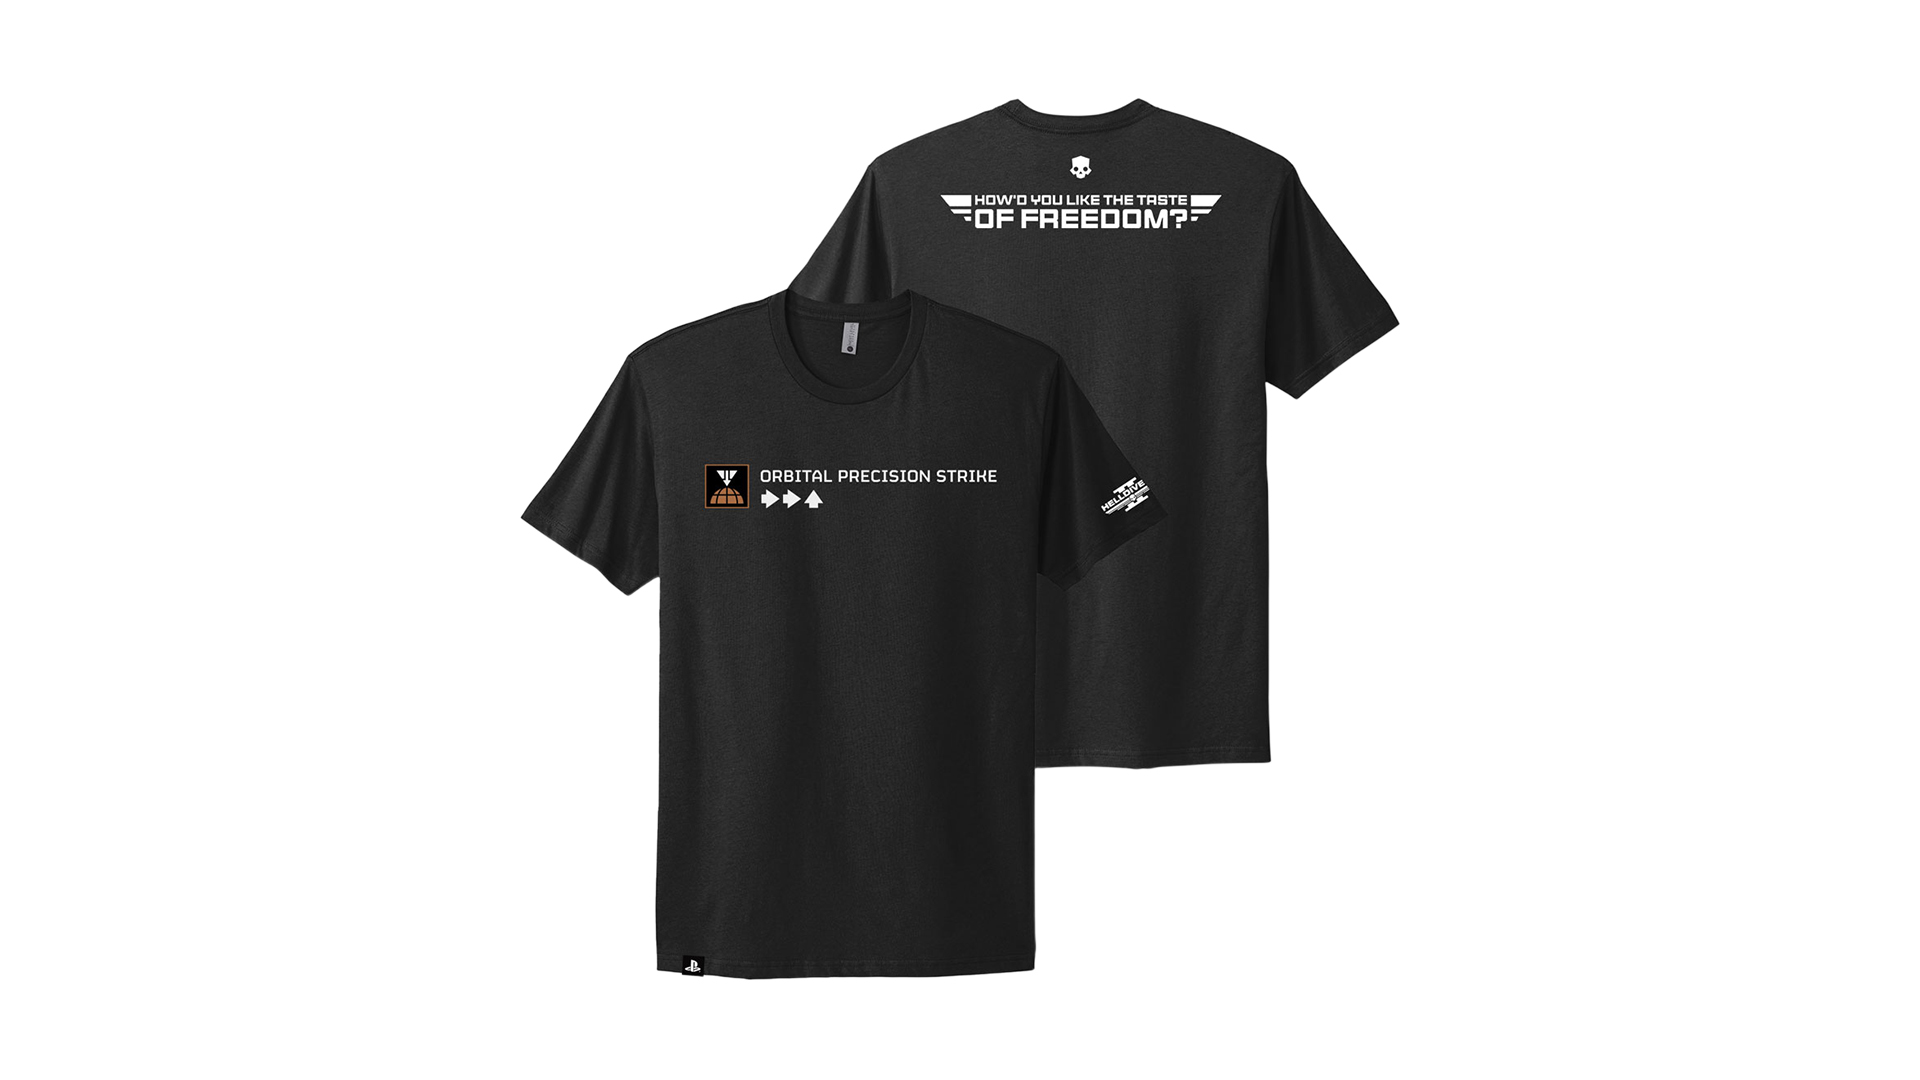  "A black t-shirt. On the front is the text ‘Orbital Precision Strike’, underneath of which is an arrow input (right, right, up). To their left is the in-game UI symbol for that Stratagem. At the bottom left of the tee is a small PlayStation symbol. On the back of the shirt is the white text: ‘How'd you like the taste of freedom?’ The left sleeve has a Helldivers 2 logo in white."